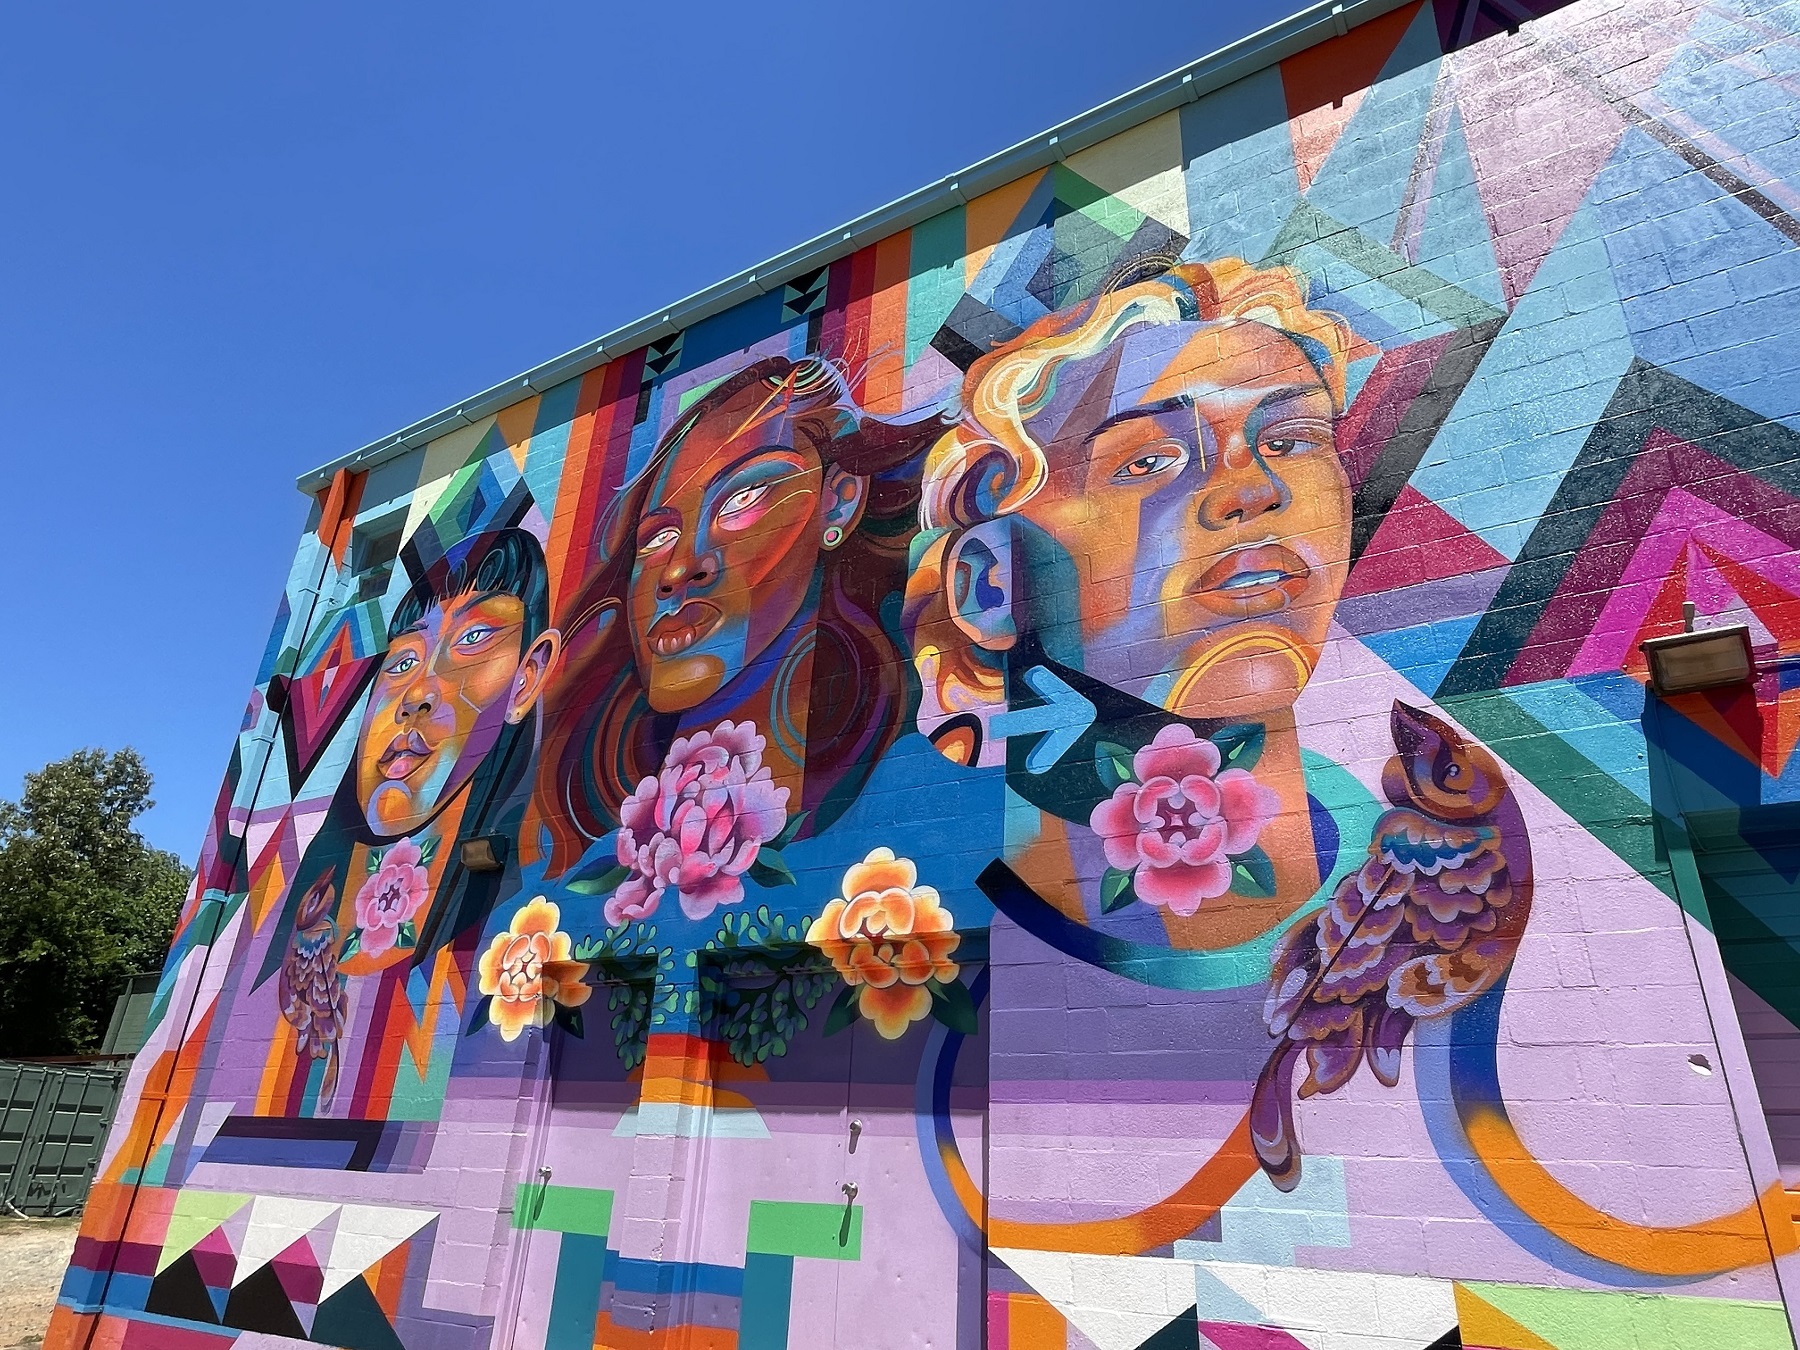 Charlotte artist Georgie Nakima was selected through ASC's Regional Artist Directory to create her mural "Natural Rhythm" for Independence Park. 